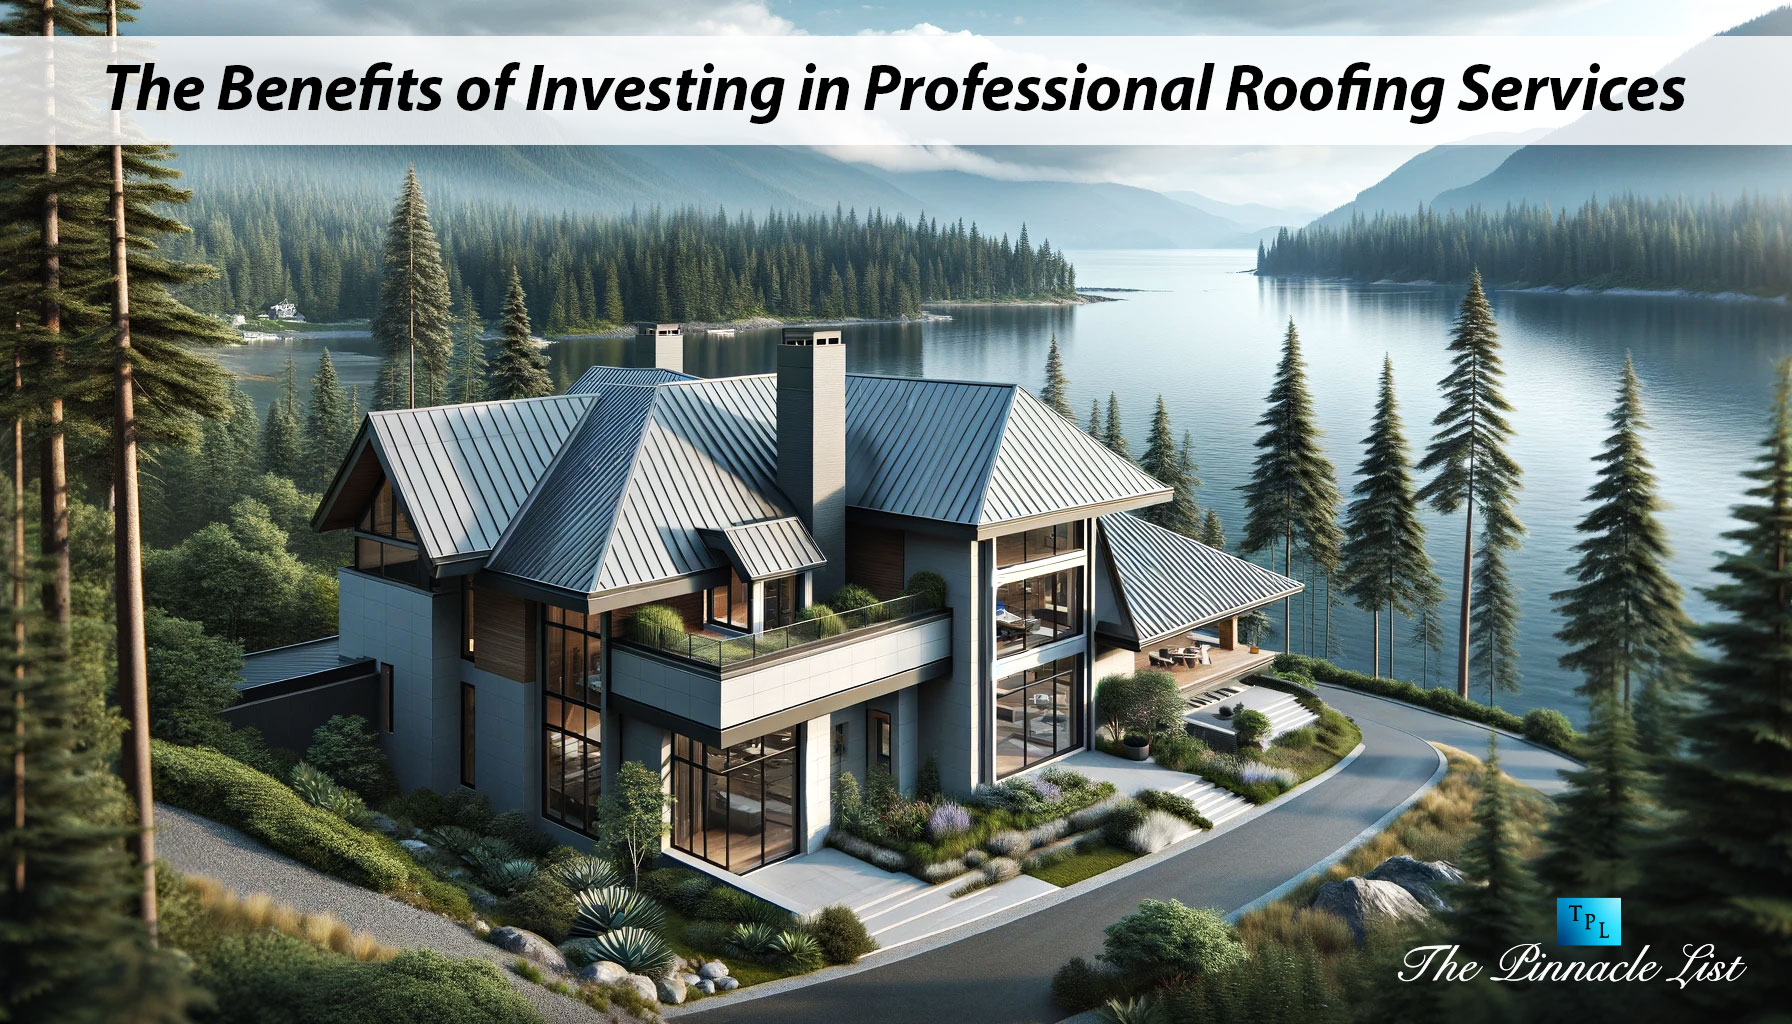 The Benefits of Investing in Professional Roofing Services